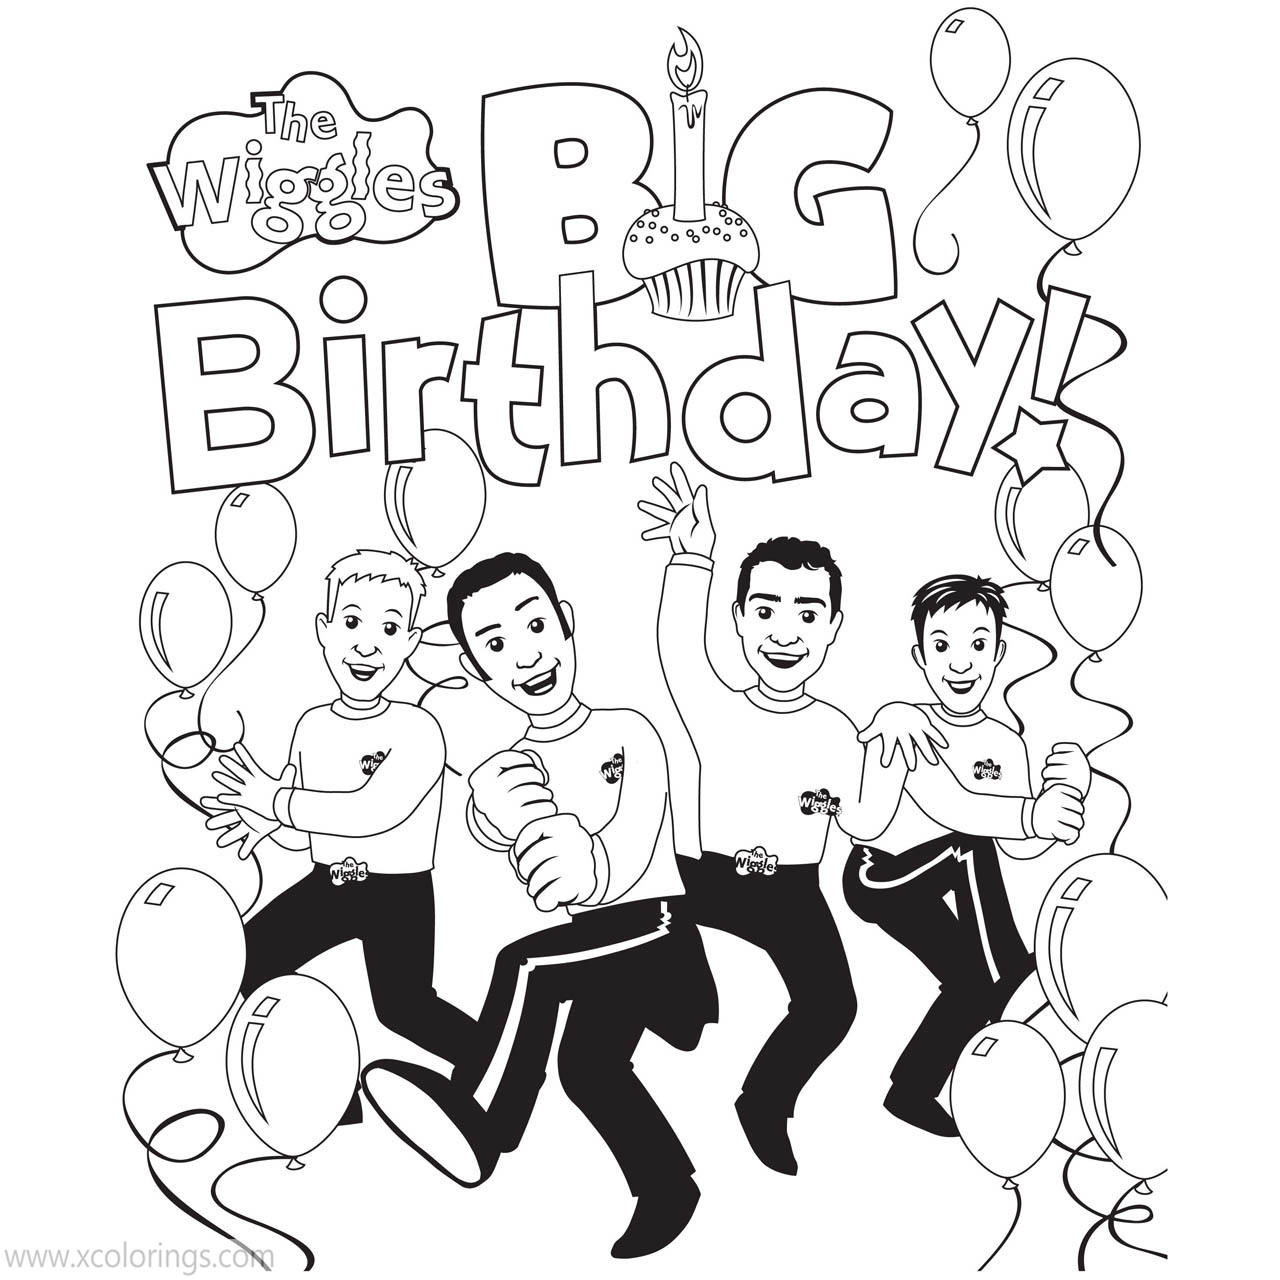 Free Wiggles Coloring Pages Big Birthday printable